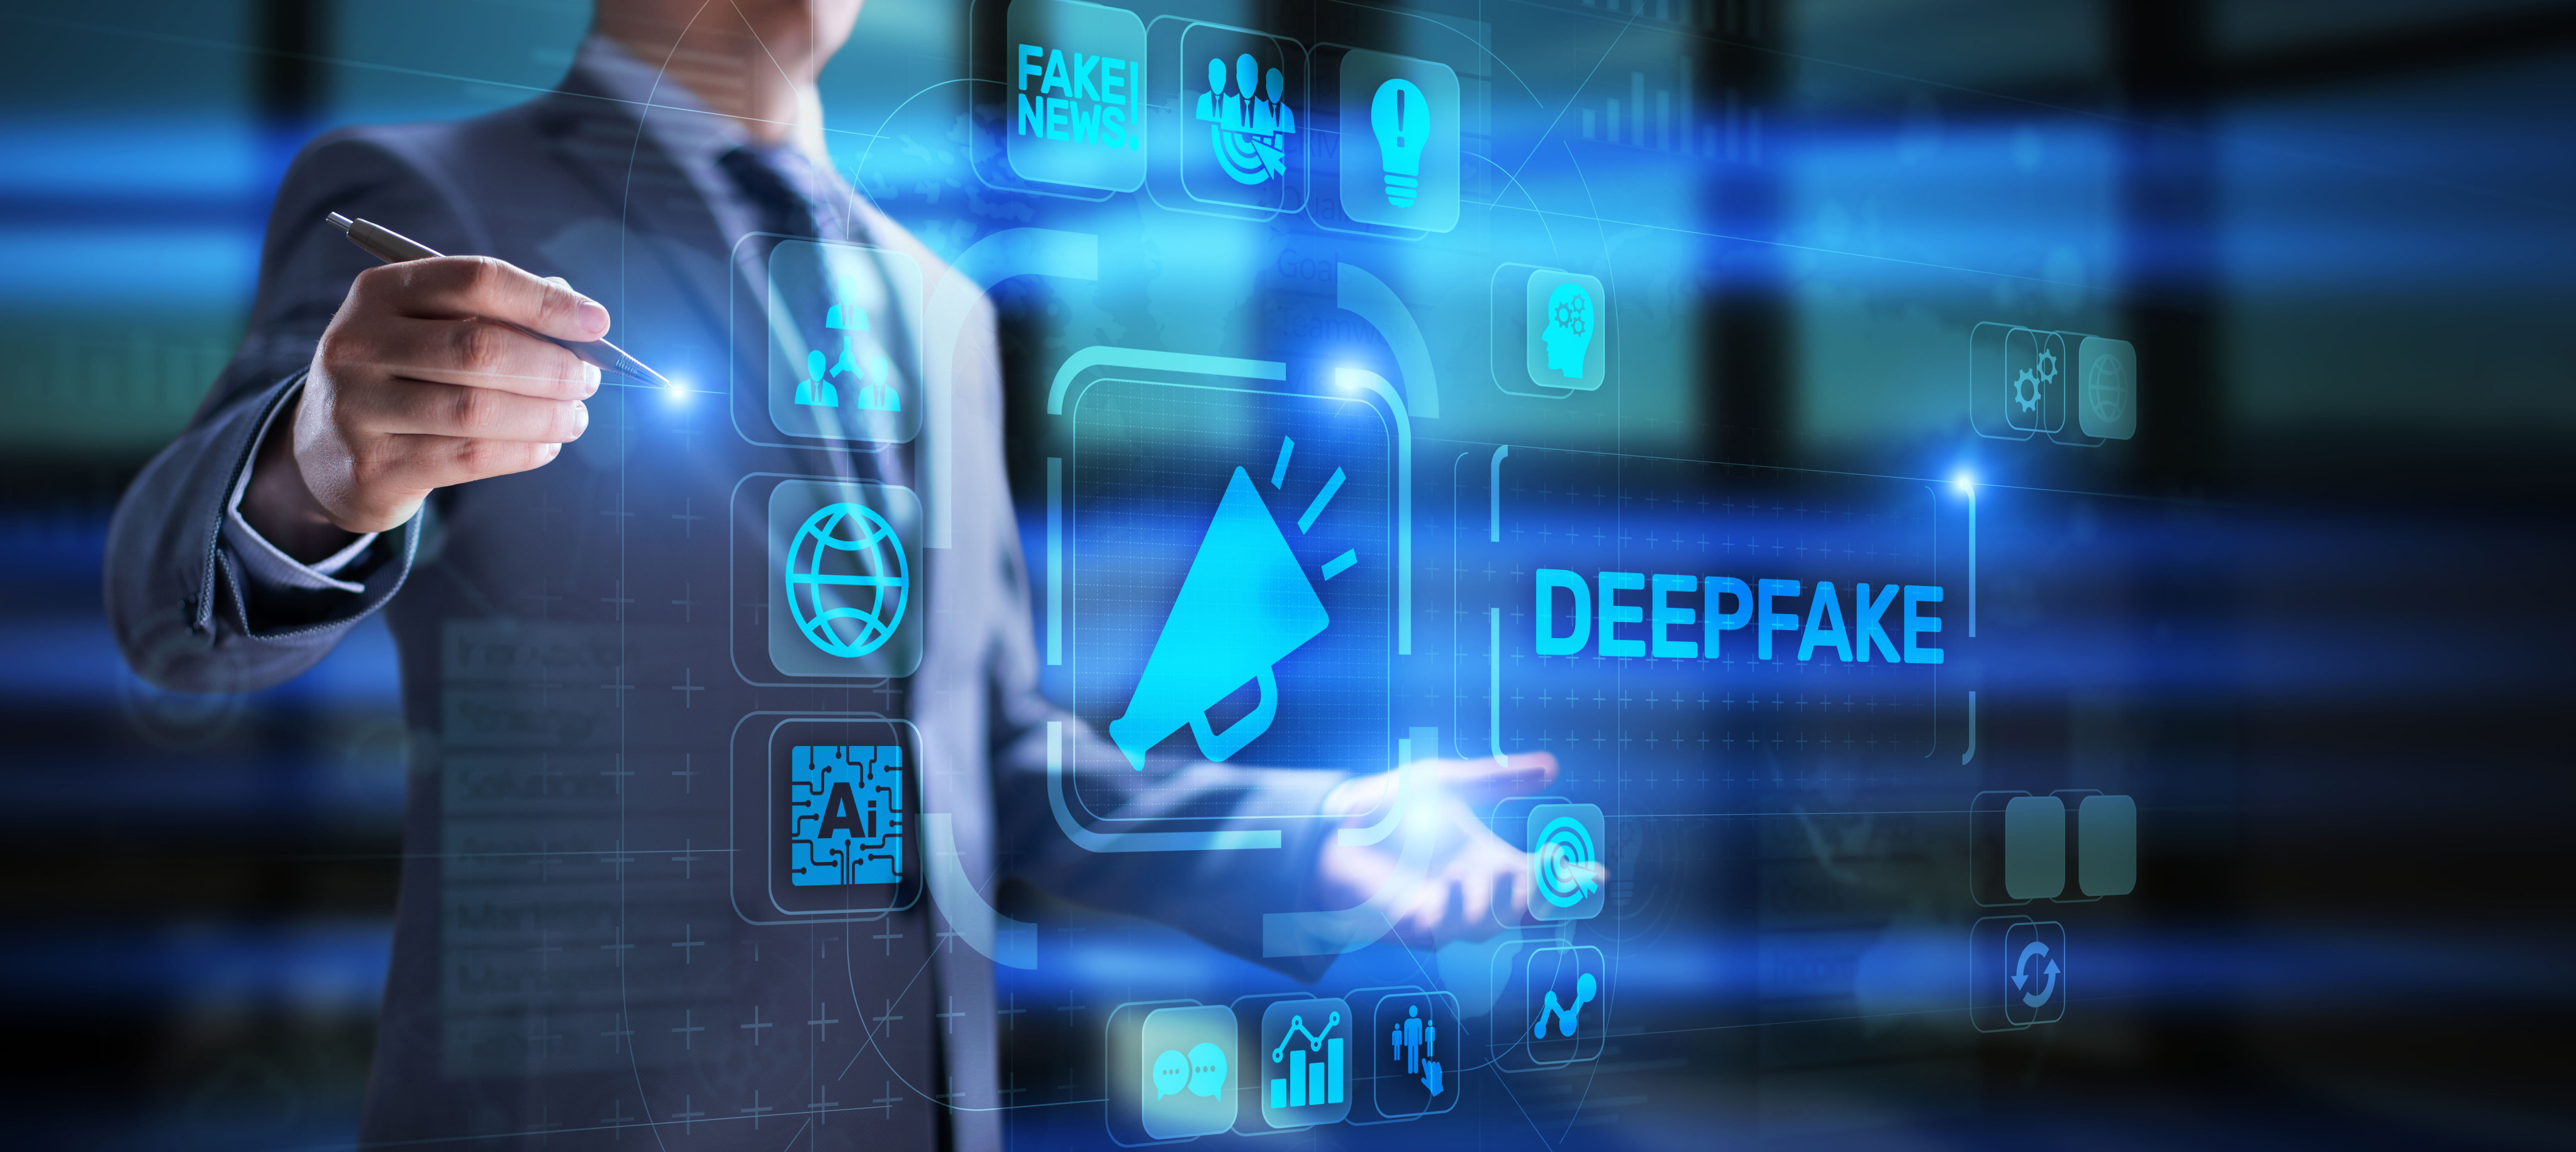 China has proposed a new regulation to control the provision of deepfake services. Photo: Shutterstock